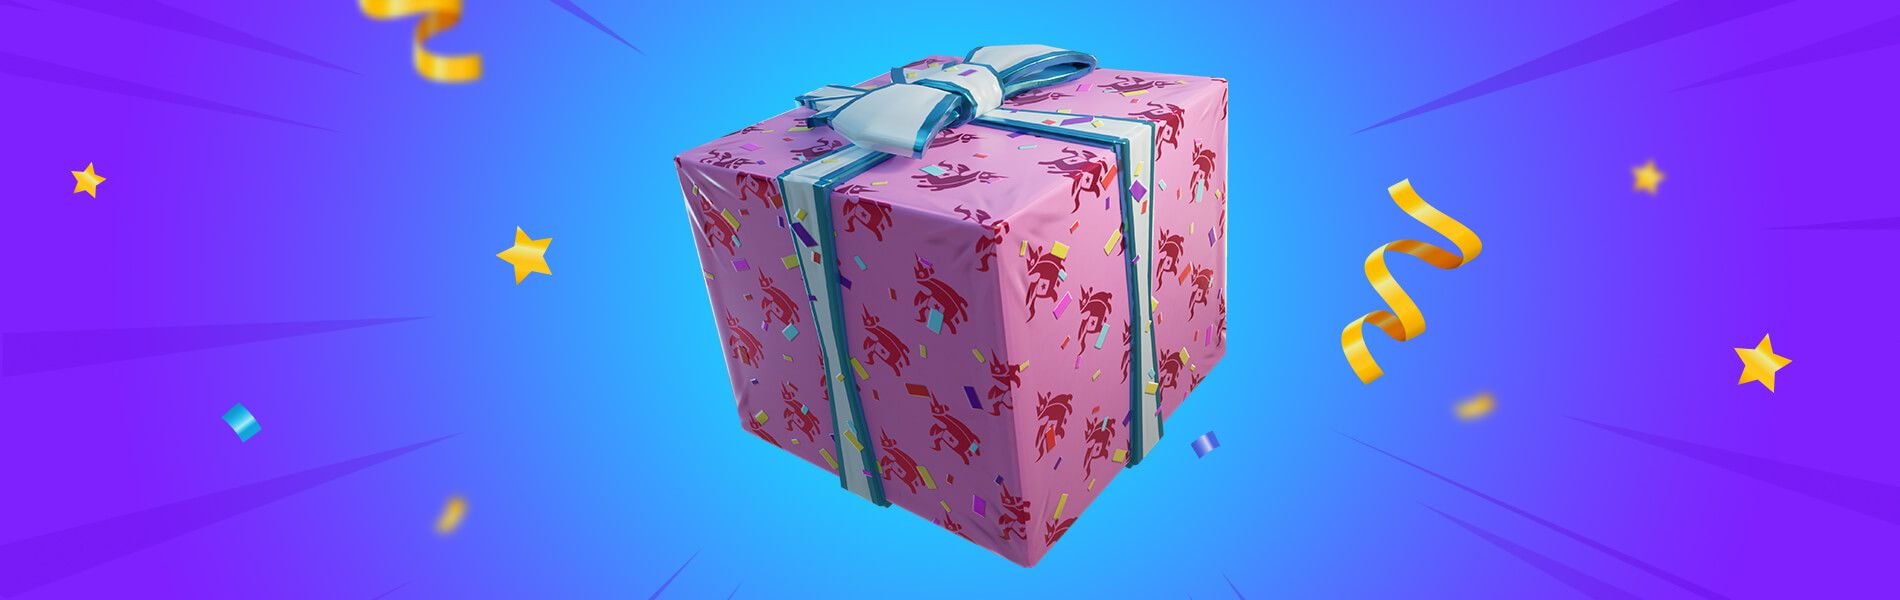 Complete Fortnite's 6th Birthday Quests for Free Rewards